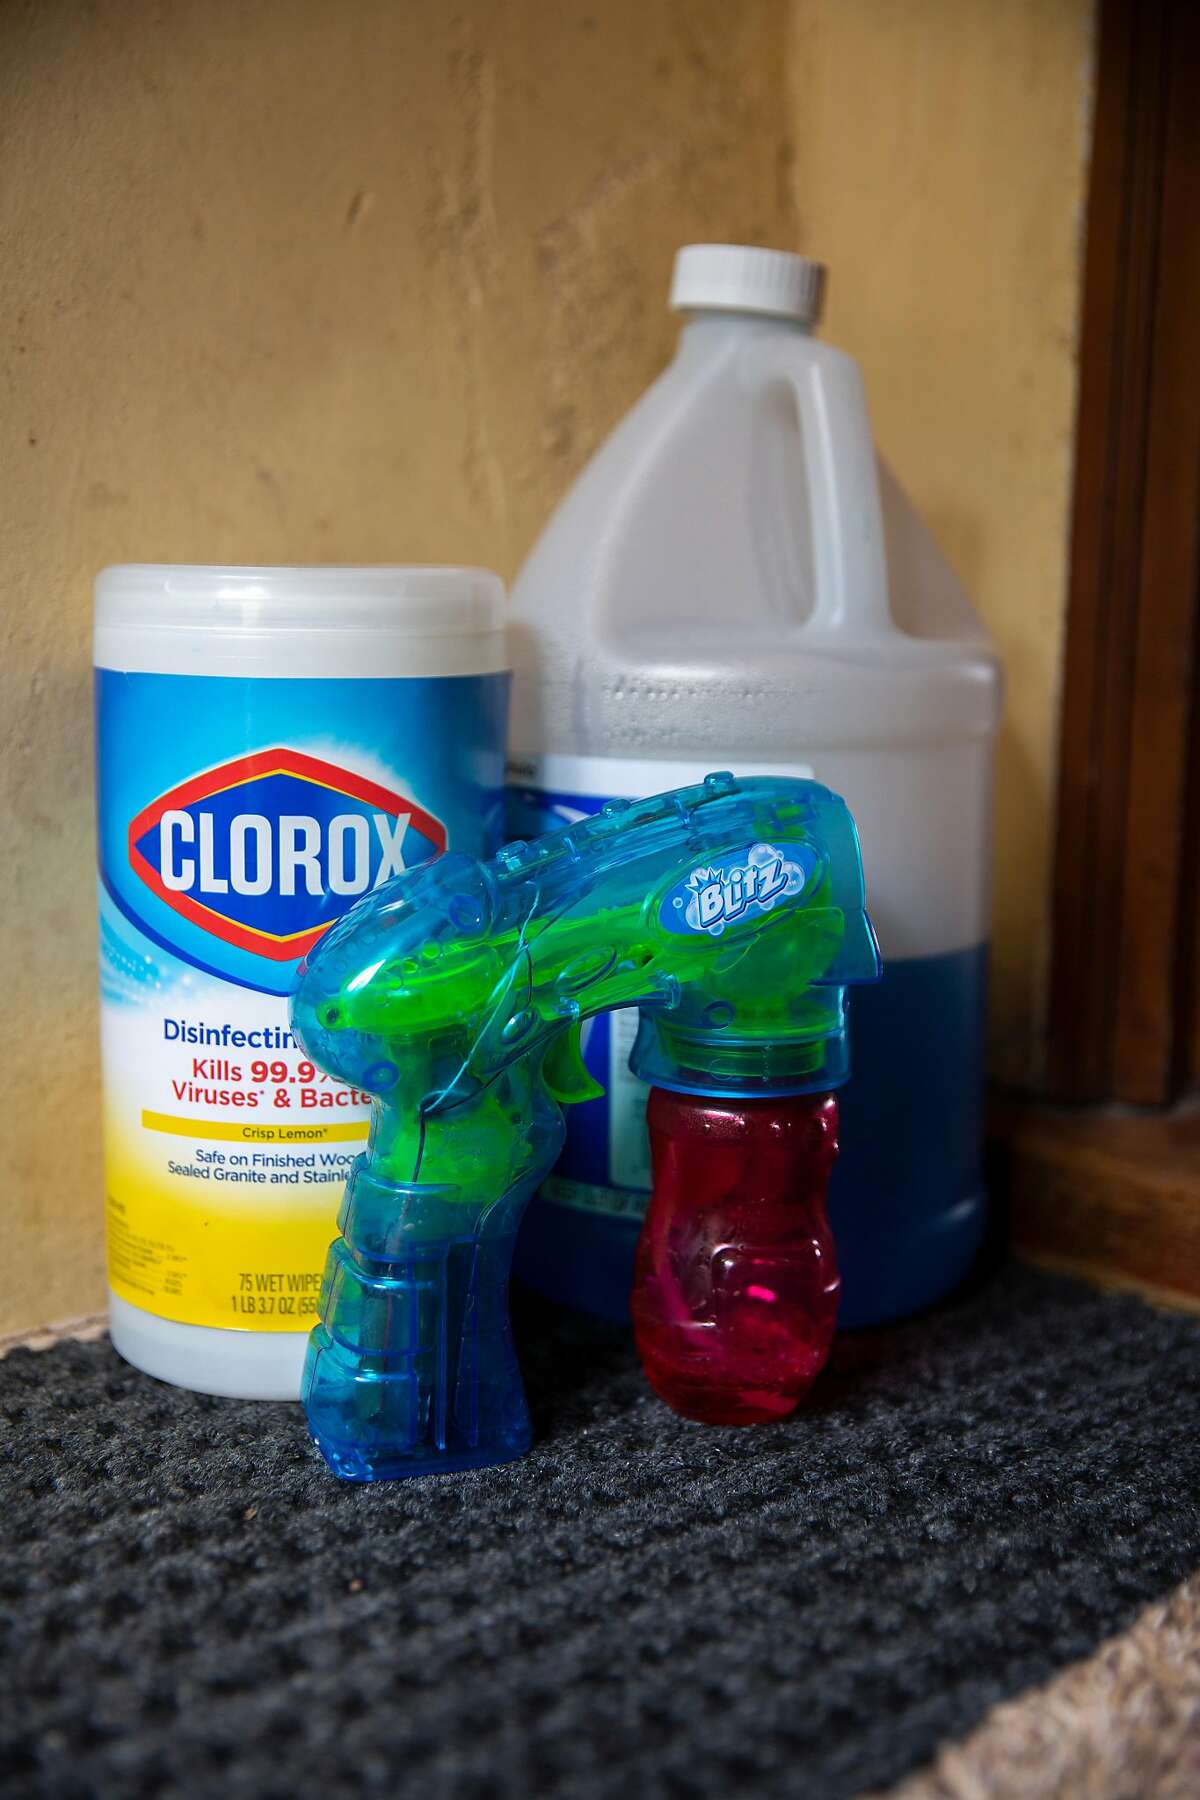 Izabel Arnold keeps disinfecting goods with a bubble toy gun for her son on home on Saturday, March 28, 2020, in San Francisco, Calif.